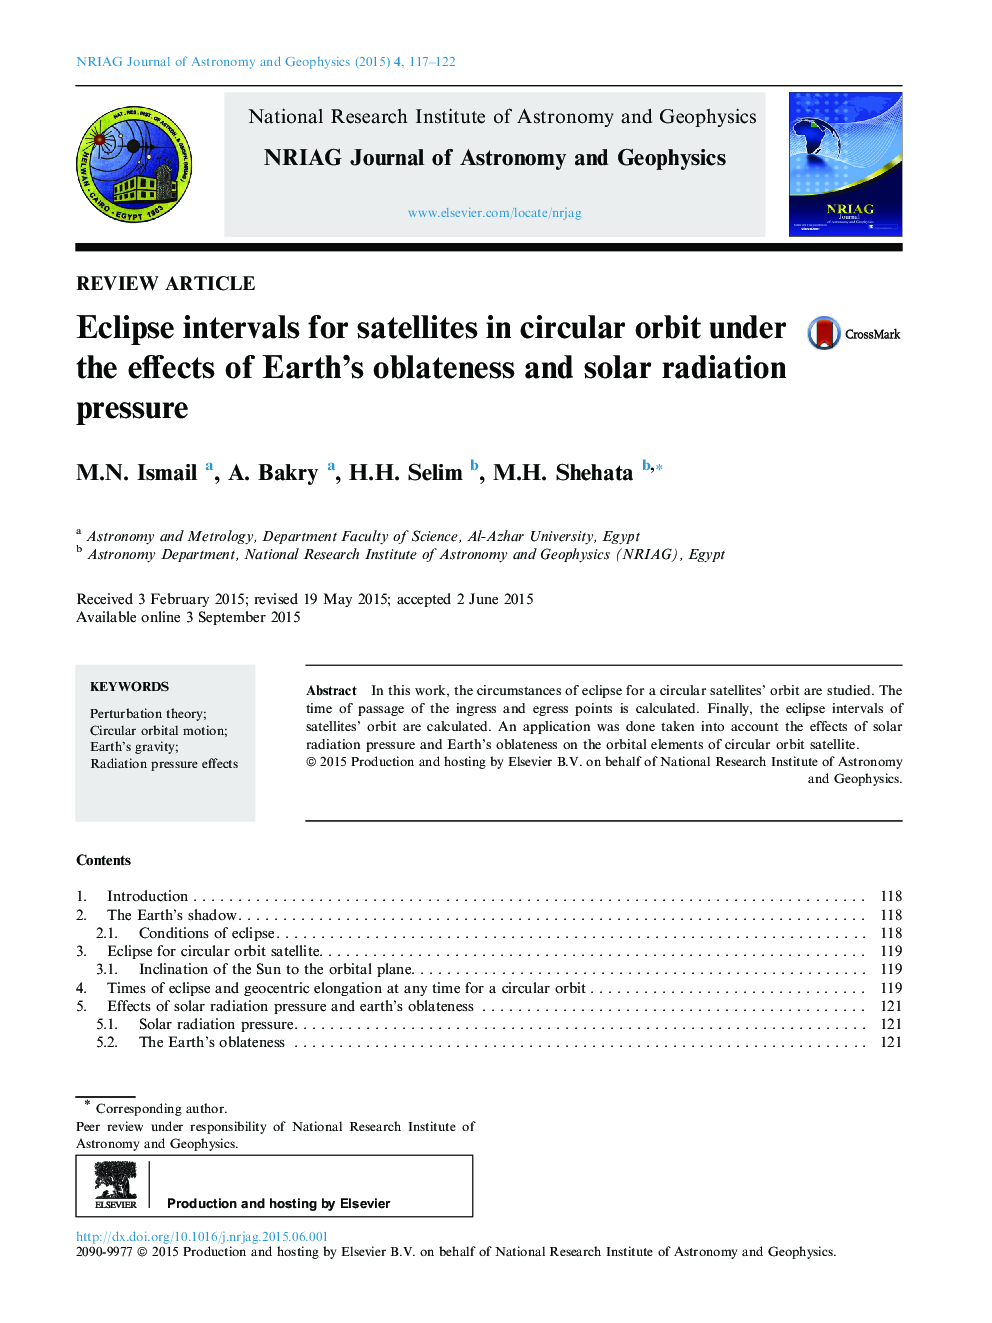 Eclipse intervals for satellites in circular orbit under the effects of Earth’s oblateness and solar radiation pressure 